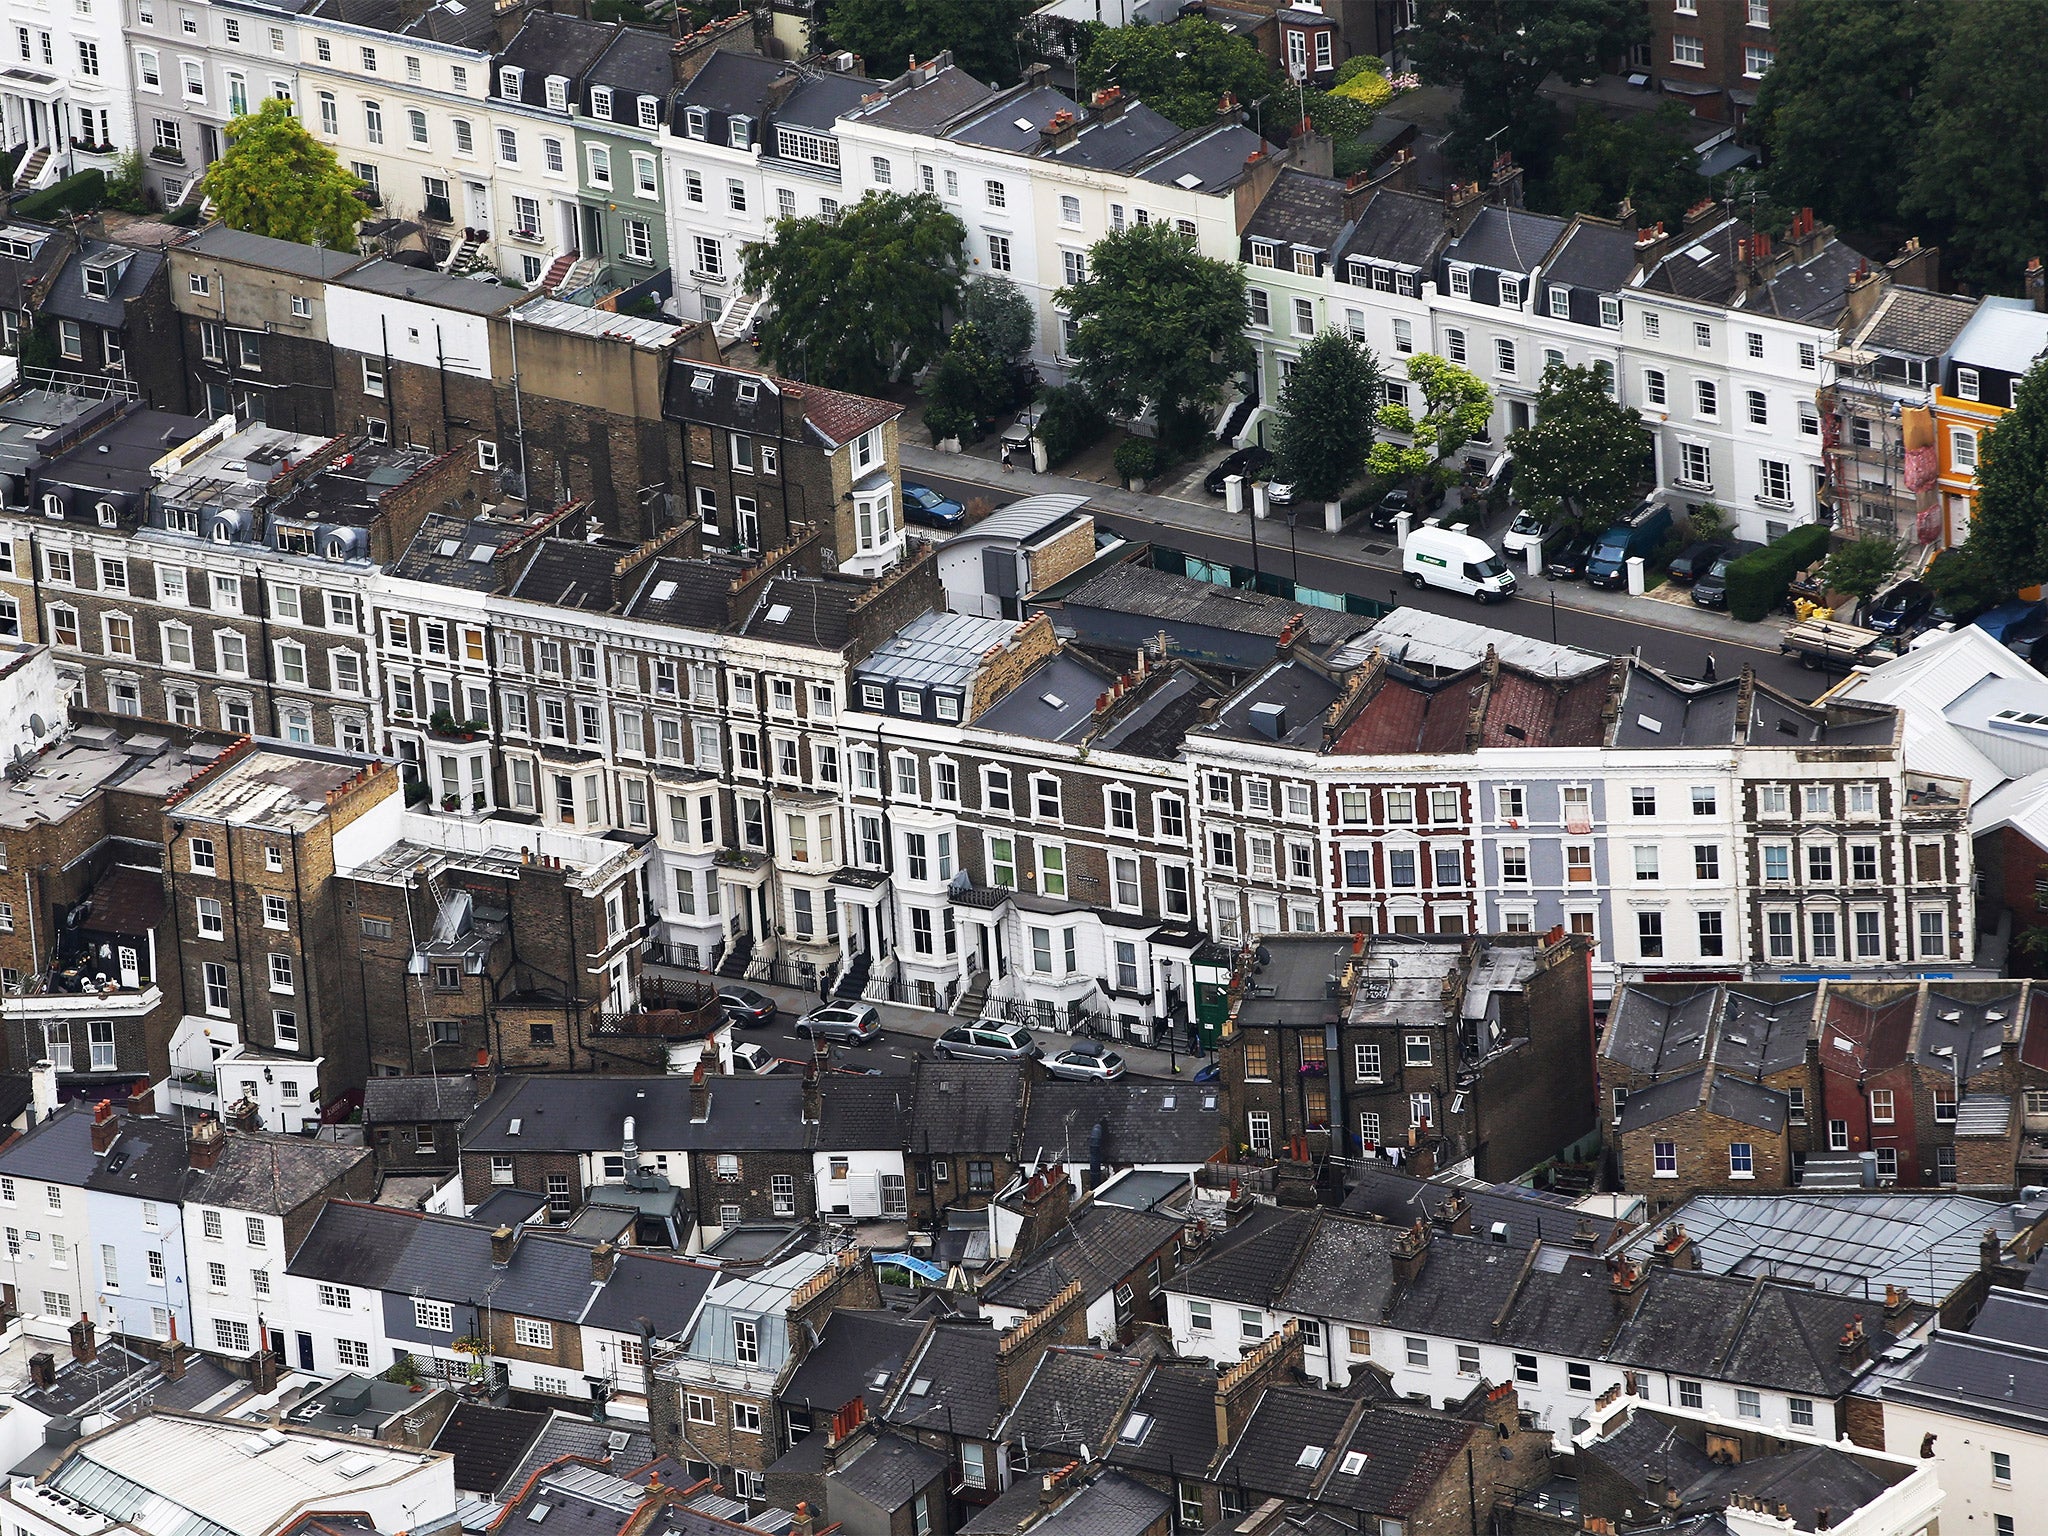 Kensington and Chelsea council in London could lose nearly all its housing stock